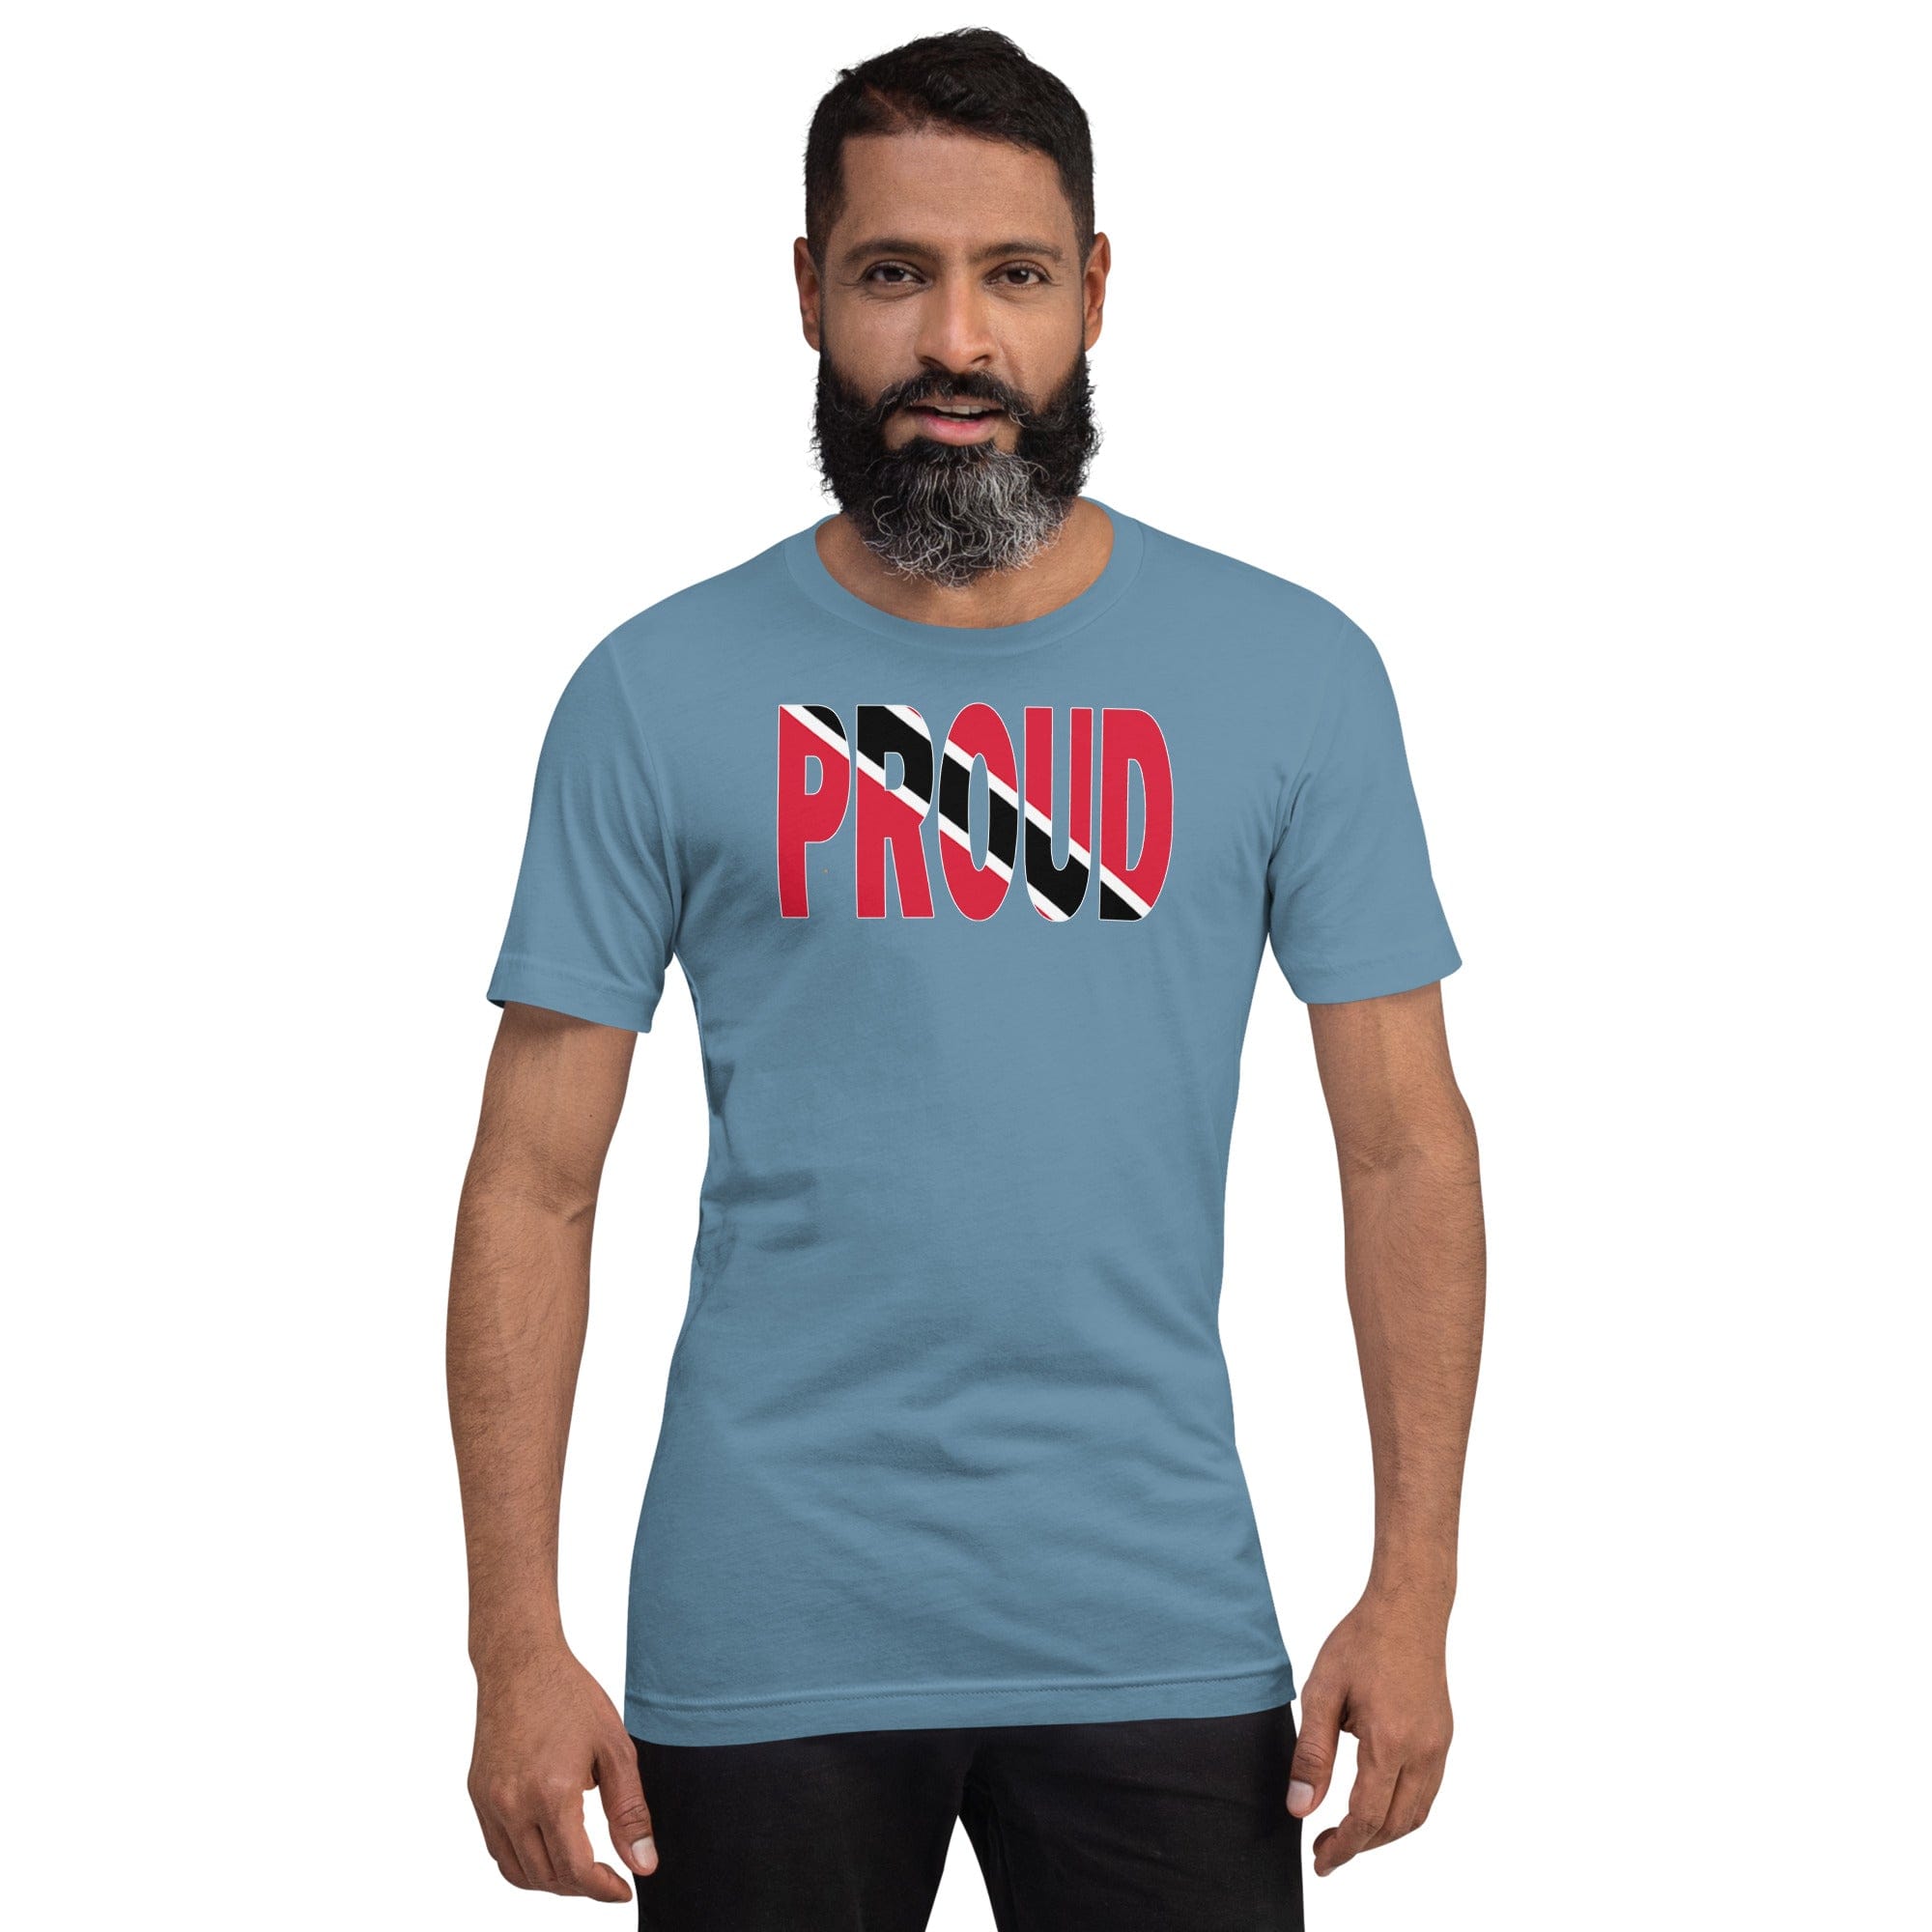 Trinidad Flag designed to spell Proud on a blue color t-shirt worn by a black man.